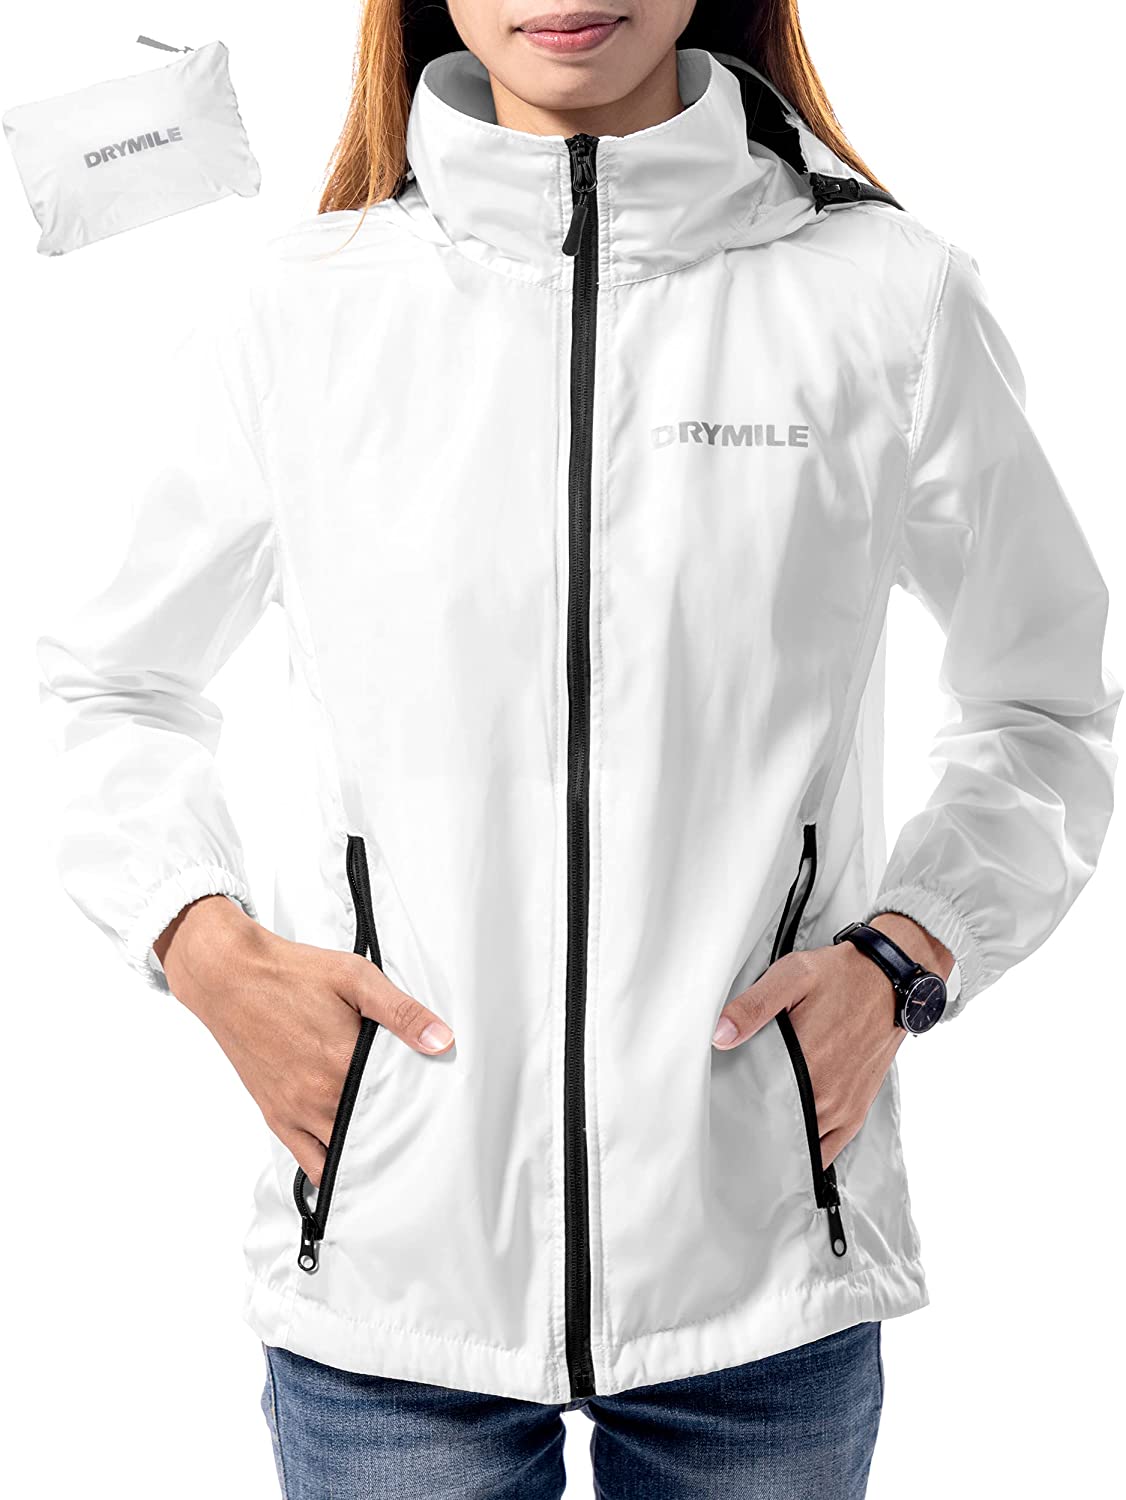 Packable Hooded Water Resistant Windbreaker DRYMILE Excursion Women's Lightweight Jacket with Face Shield